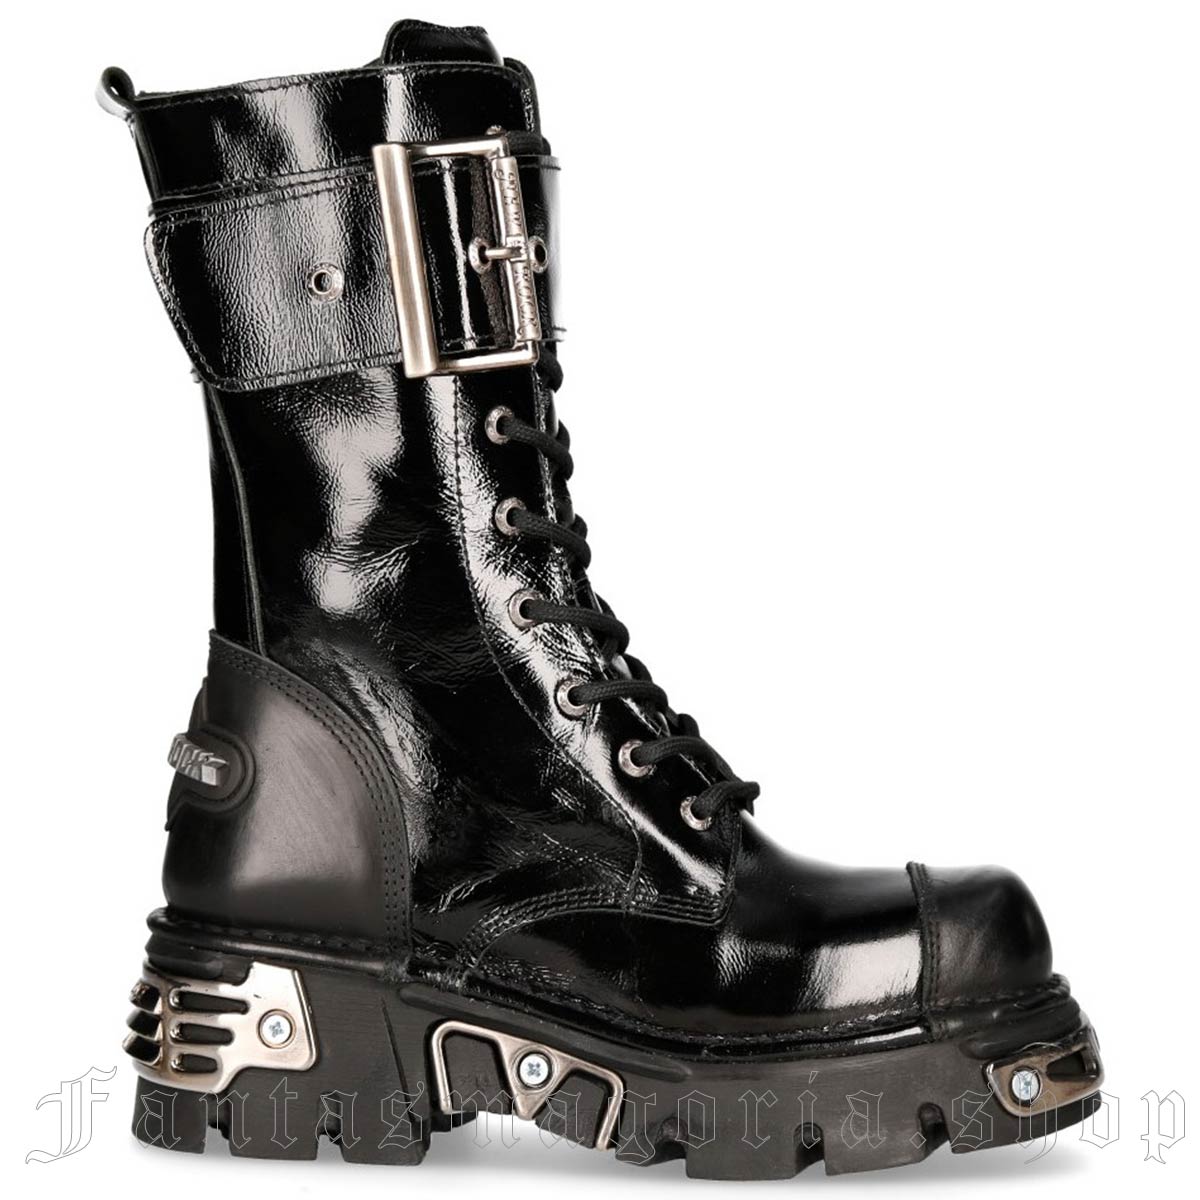 Punk black glossy natural leather chunky rubber sole metallic detail large buckle combat boots. - New Rock - M-312-S6